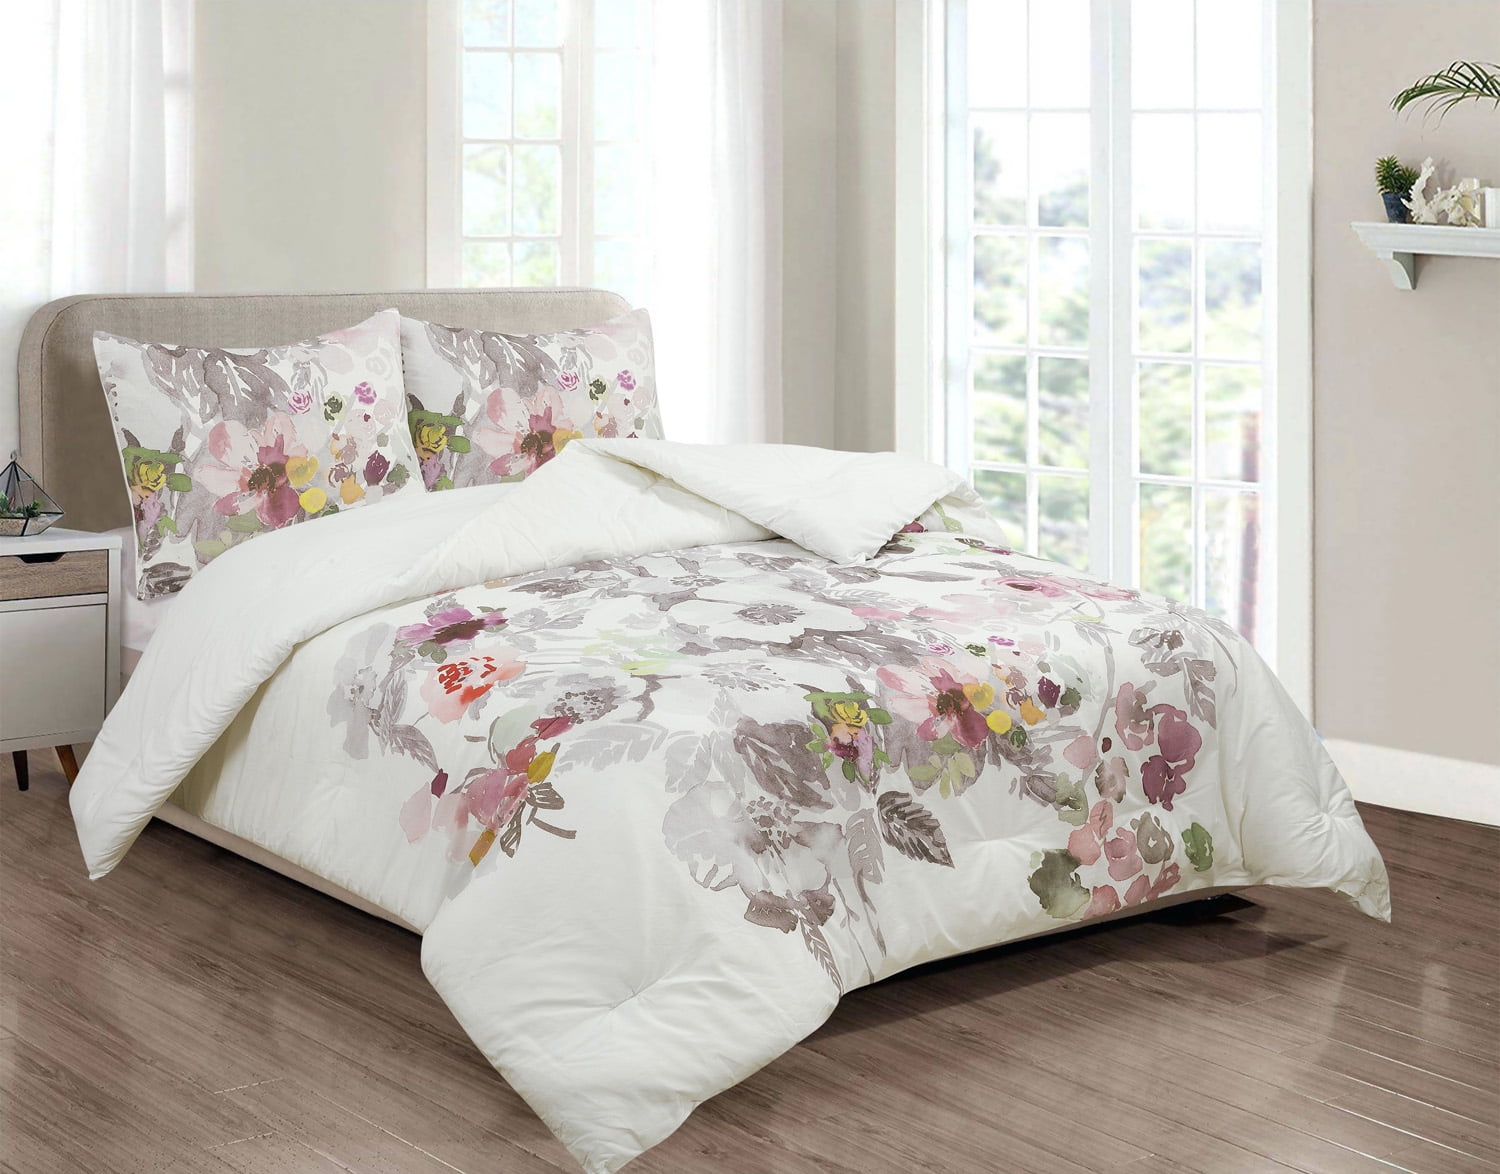 Queen Size Bedspread floral pattern 100% Cotton Throw With Pillow Cover 